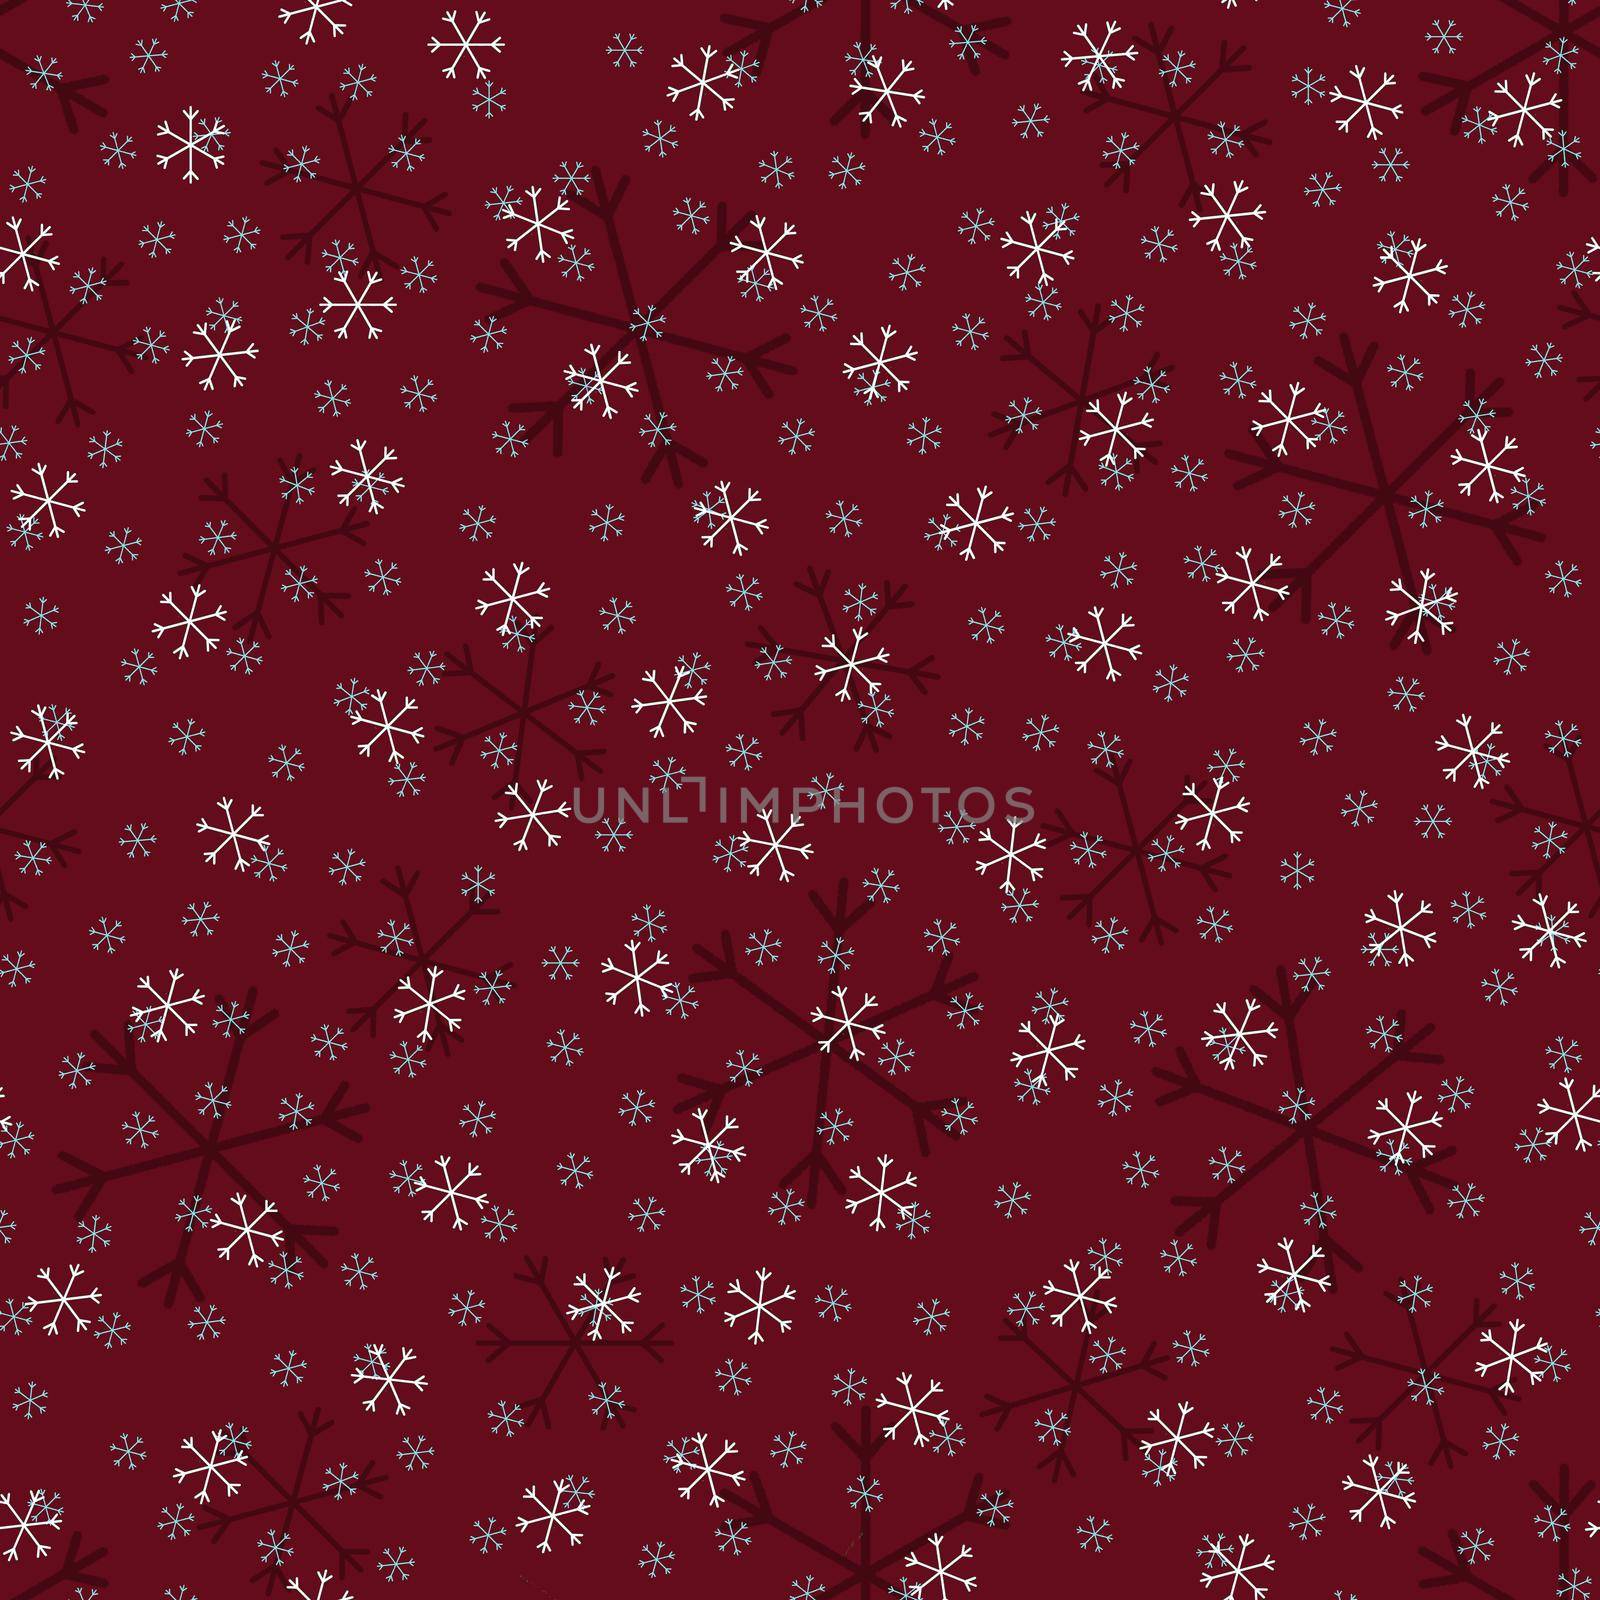 Seamless Christmas pattern doodle with hand random drawn snowflakes.Wrapping paper for presents, funny textile fabric print, design,decor, food wrap, backgrounds. new year.Raster copy.Burgundy white by Angelsmoon